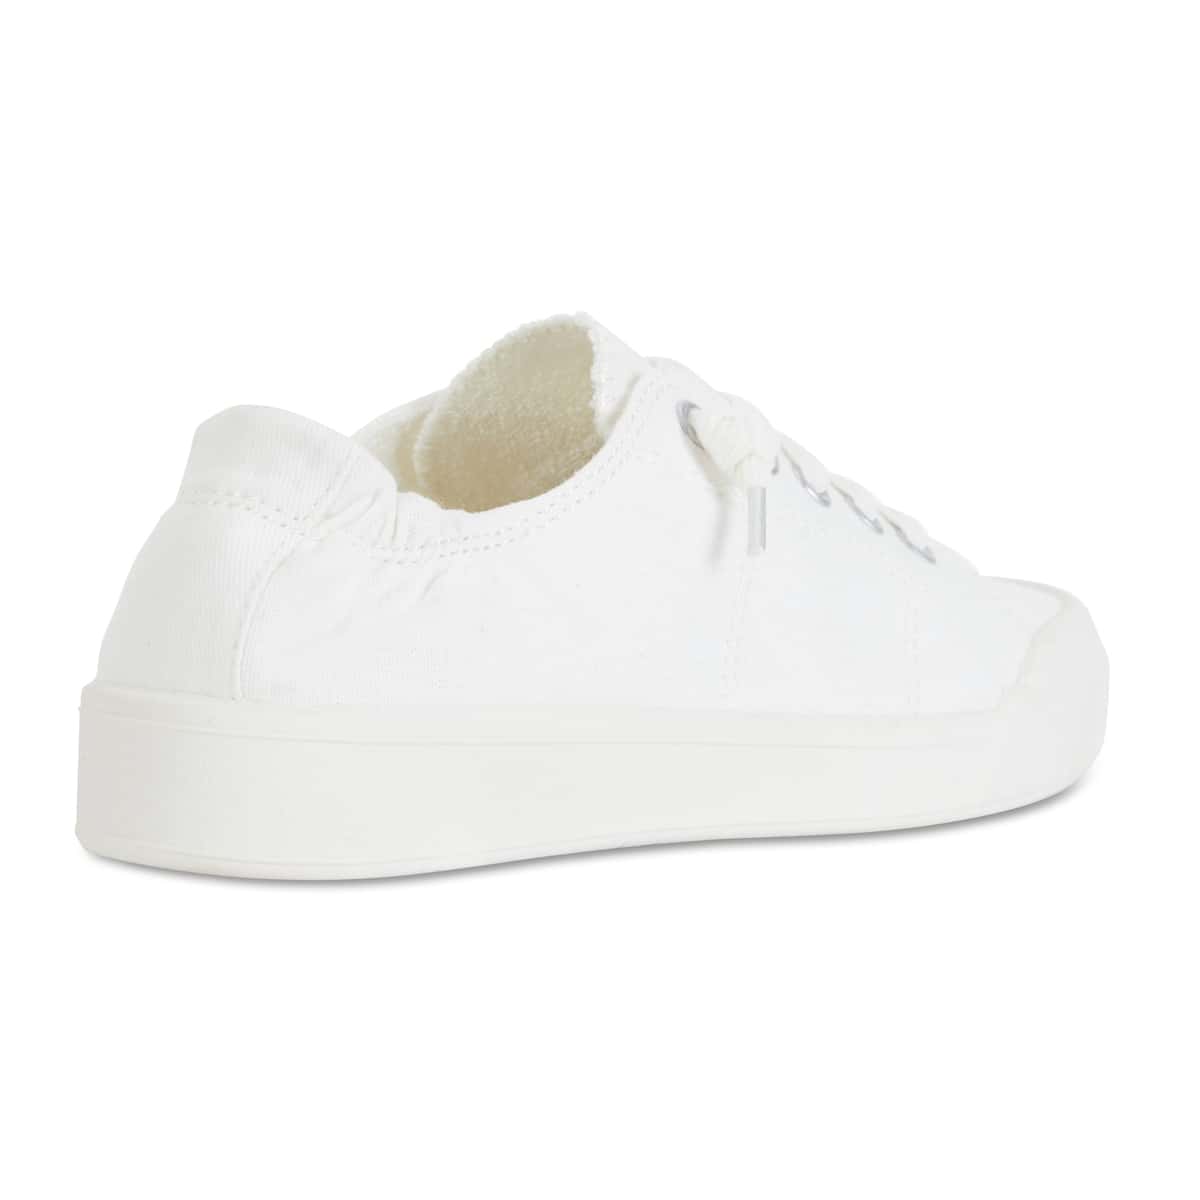 Switch Sneaker in White Canvas